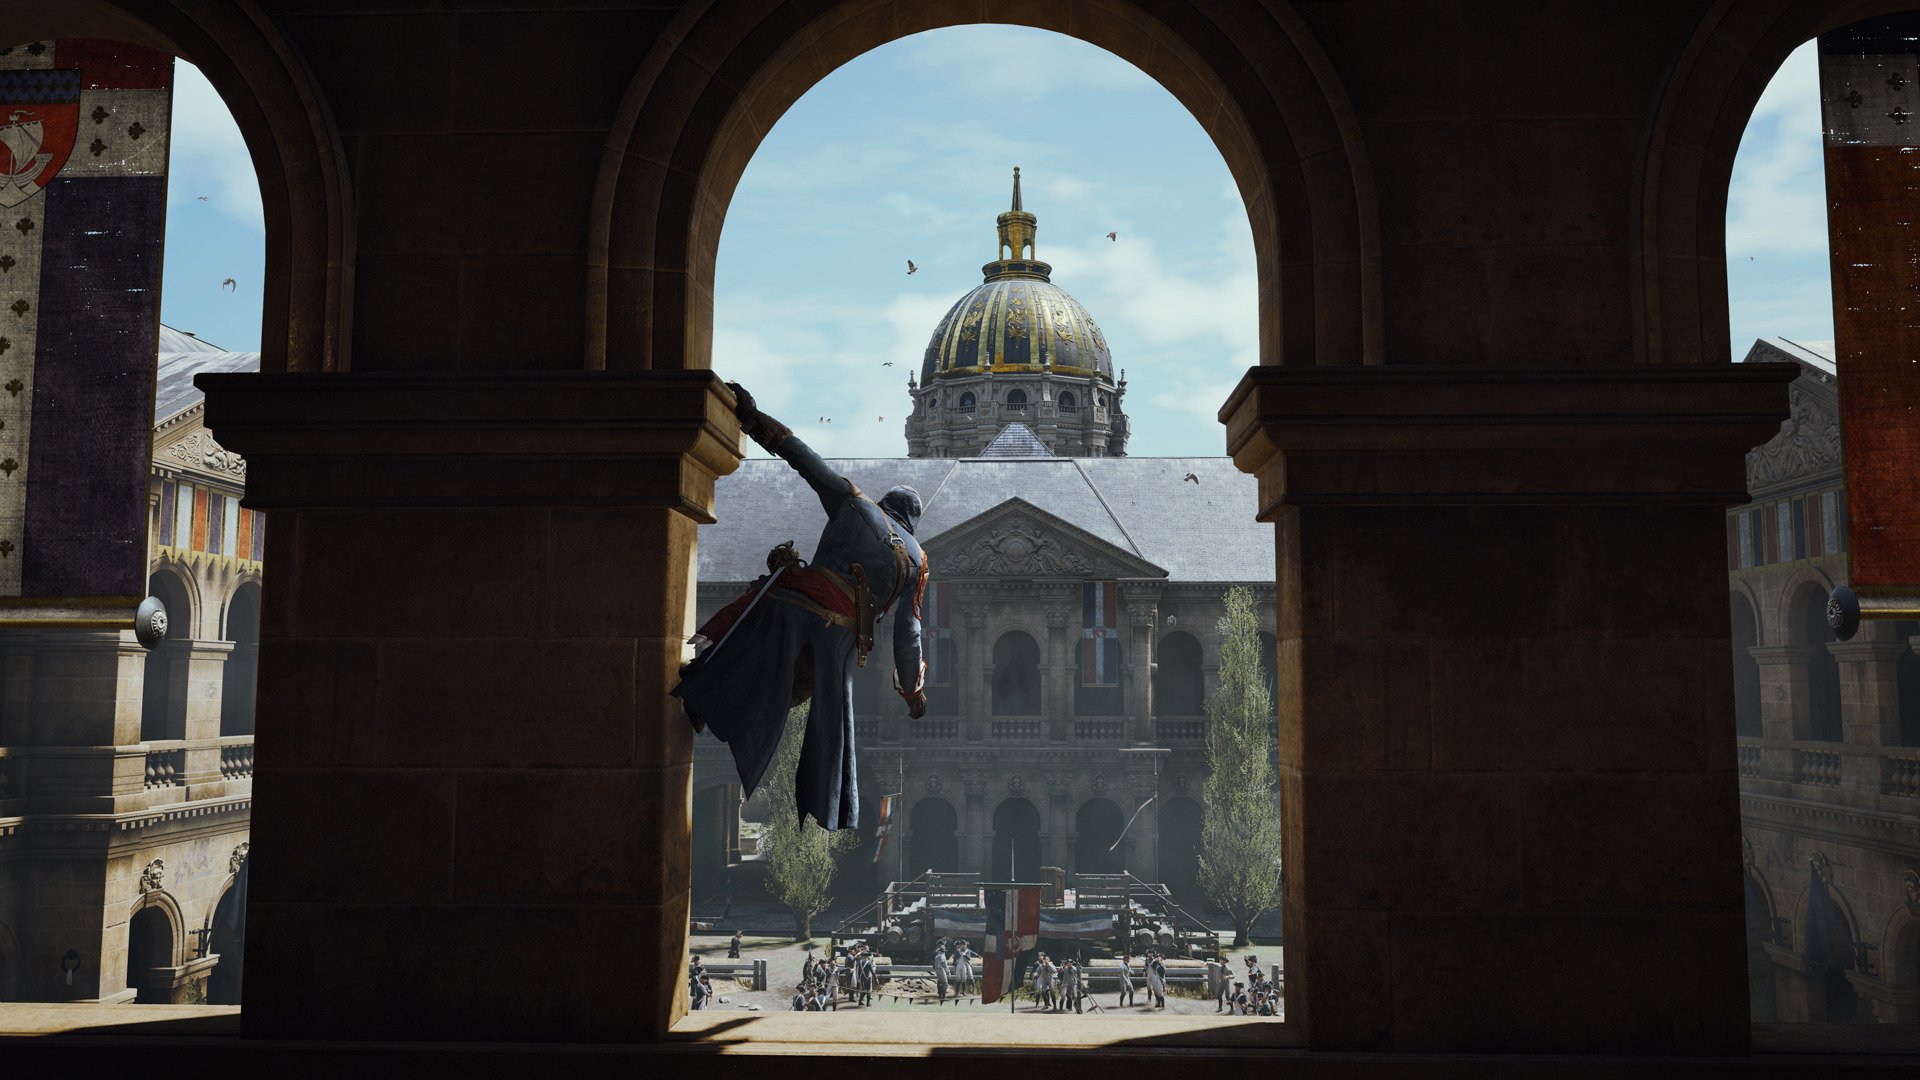 assassin's creed: unity, assassin's creed, video game